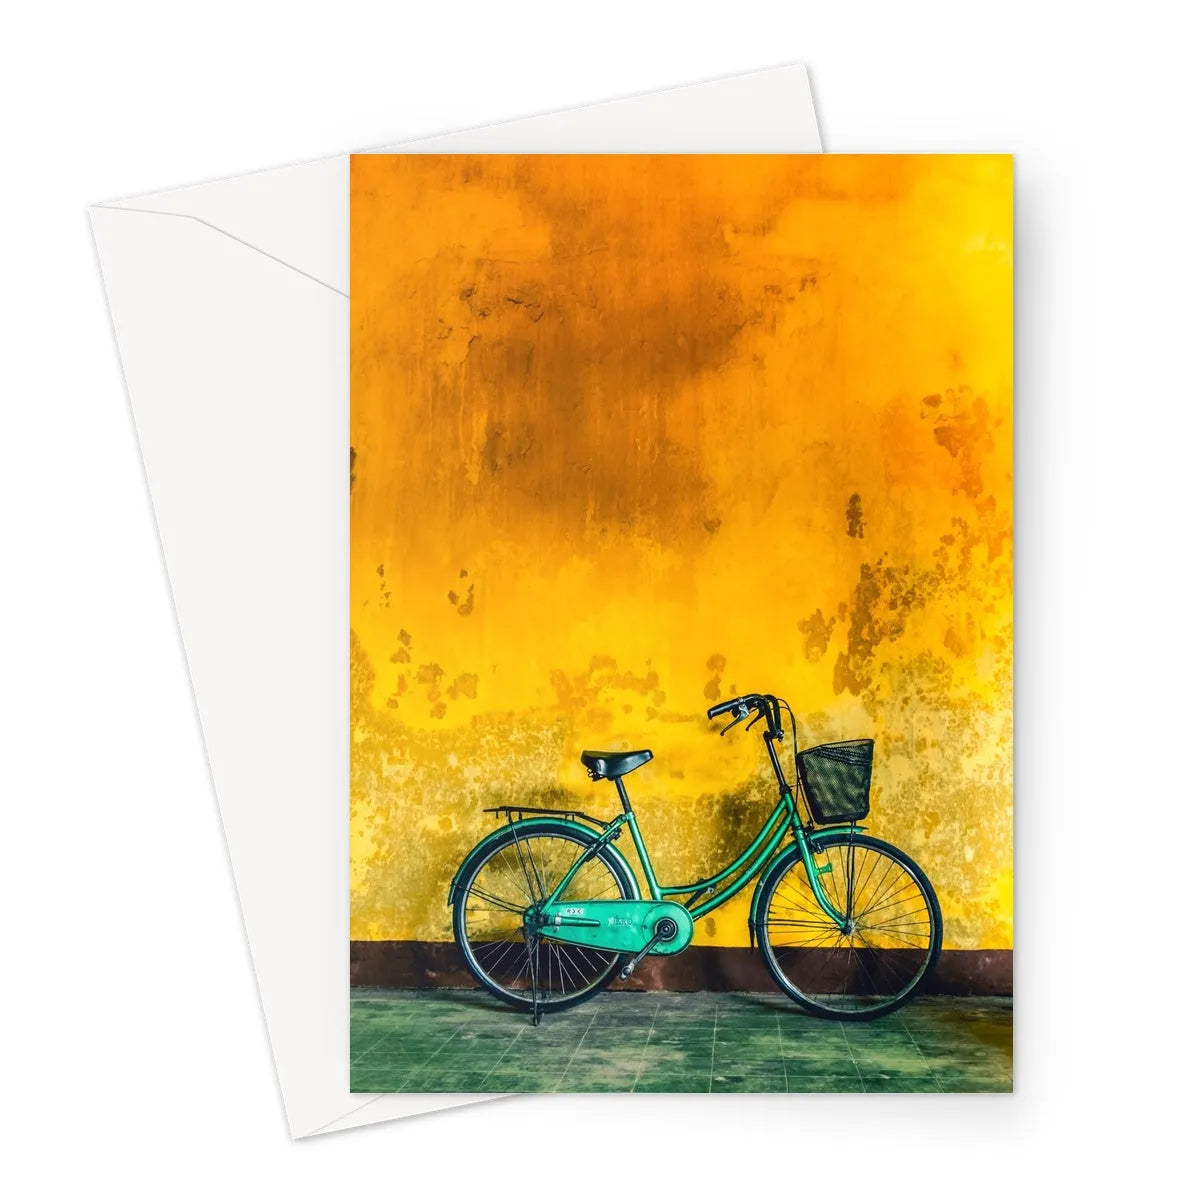 Lemon Lime Greeting Card - A5 Portrait / 1 Card - Greeting & Note Cards - Aesthetic Art